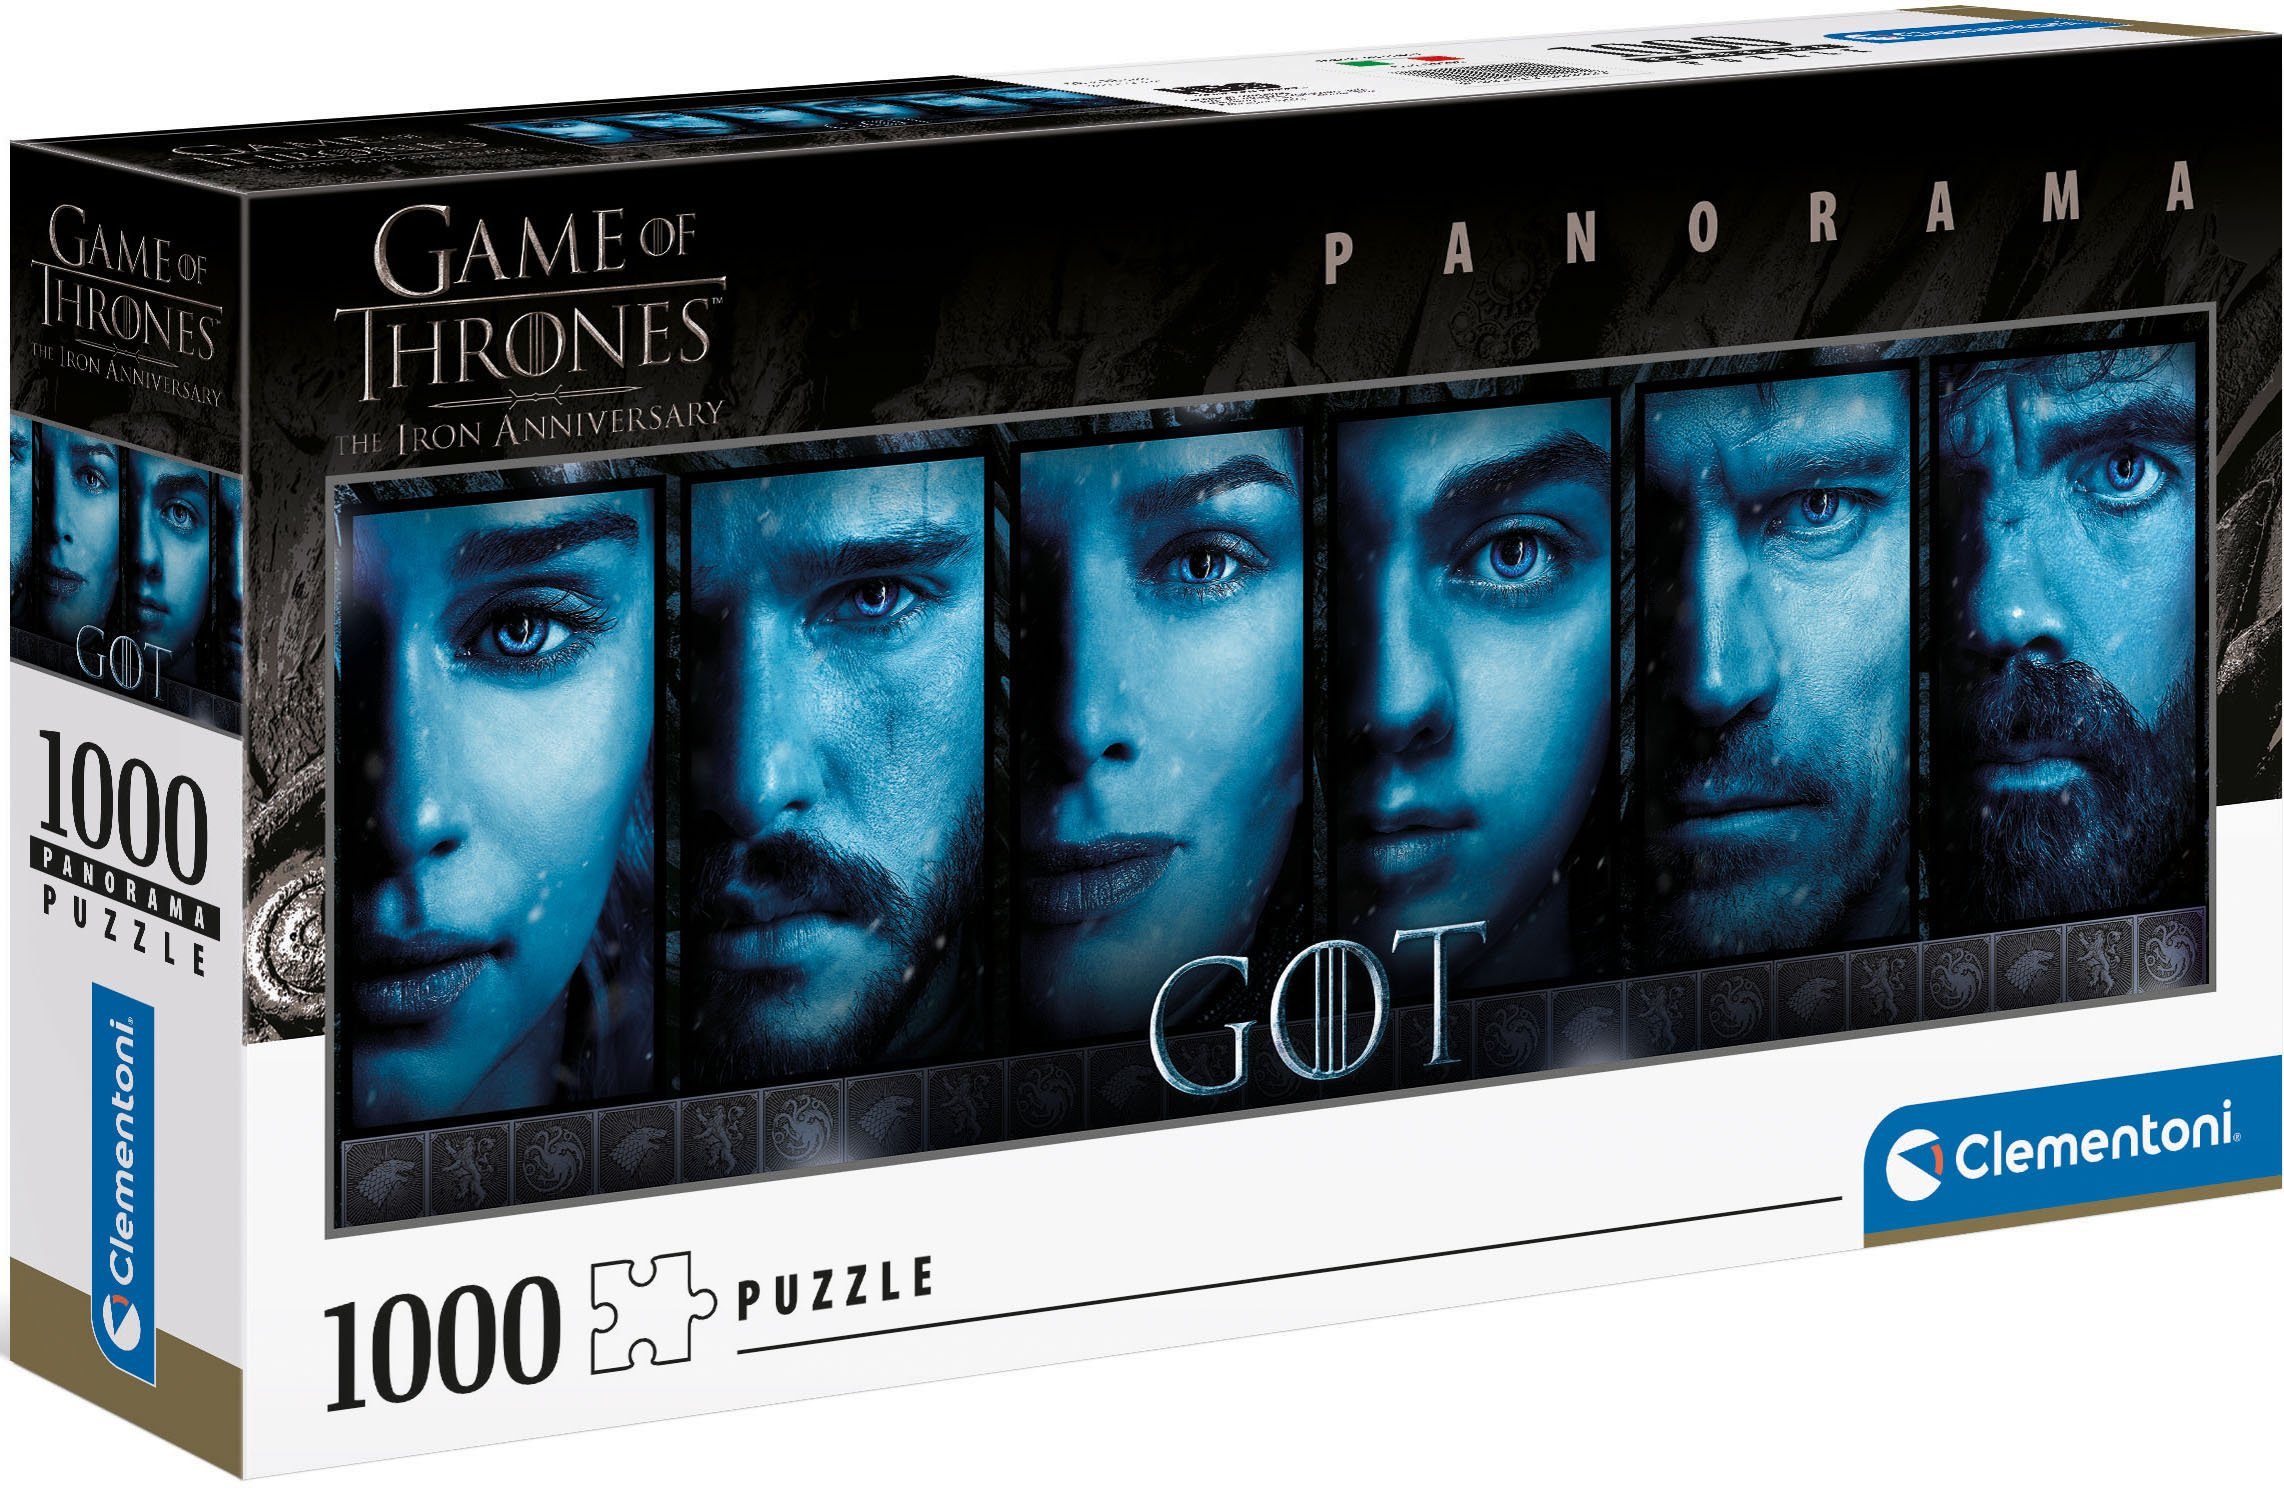 Image of Clementoni Game of Thrones 1000 Teile Puzzle Clementoni-39590